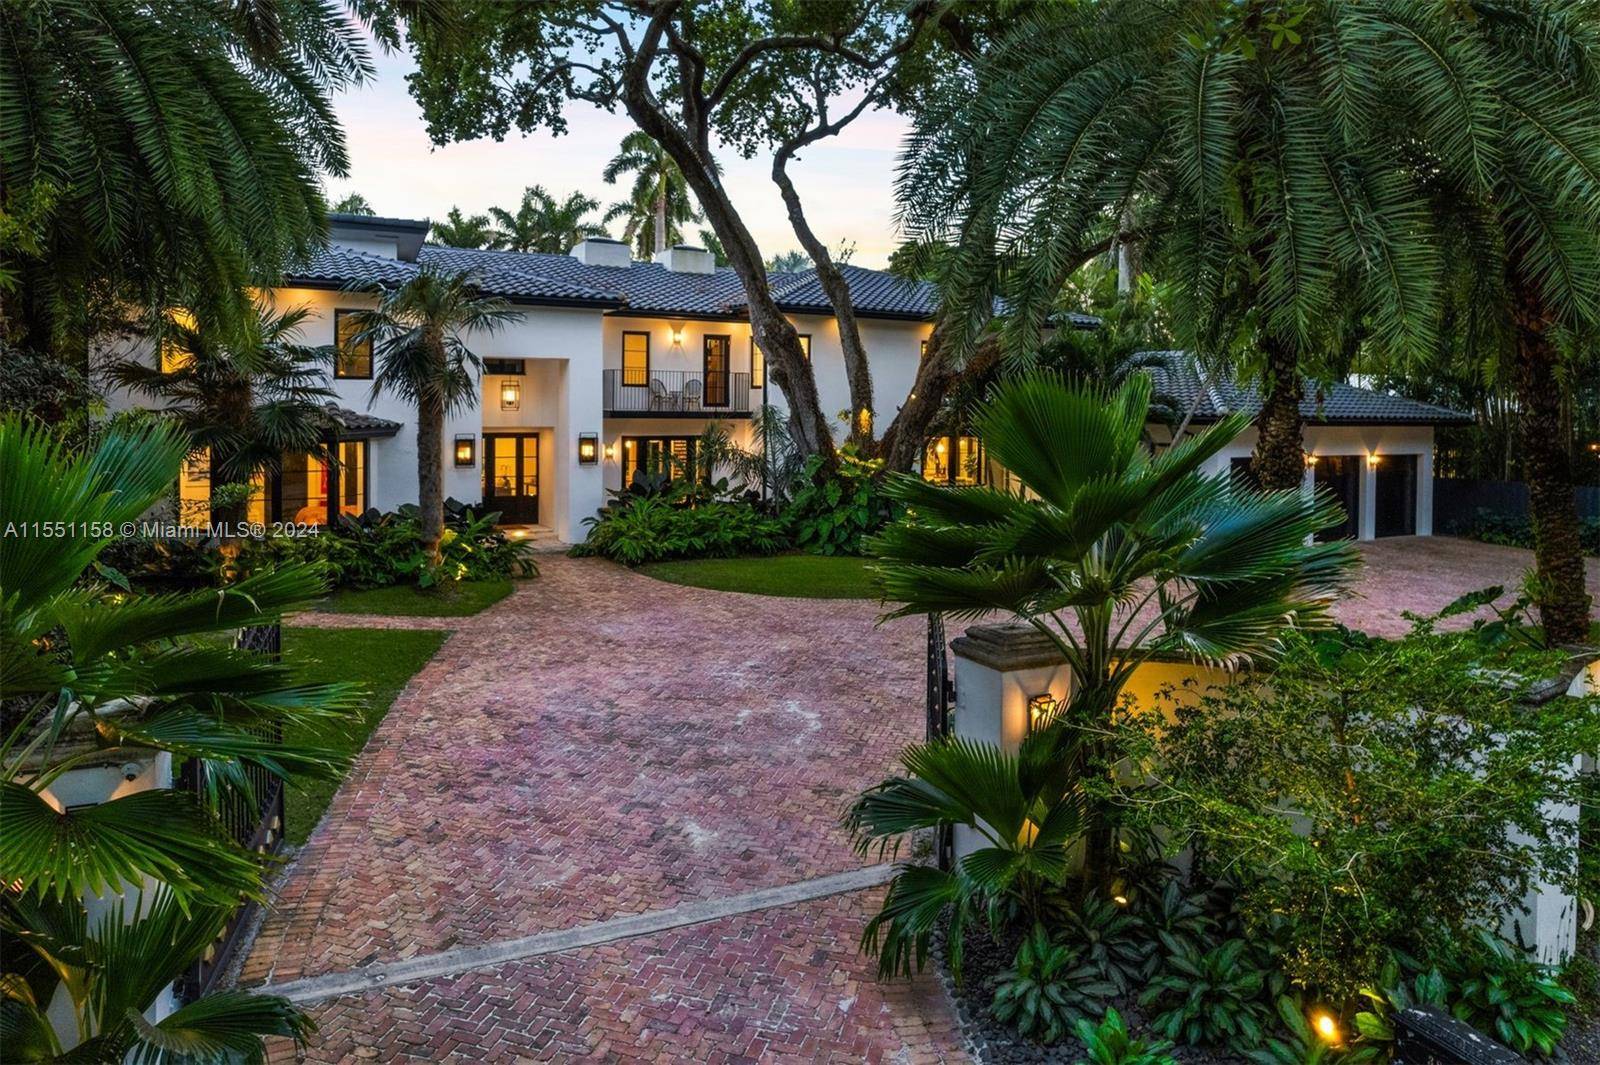 Completely renovated in 2022, the stunning 7, 599 SF estate is tucked away on Leafy Way, a quiet private road in highly sought after South Coconut Grove.